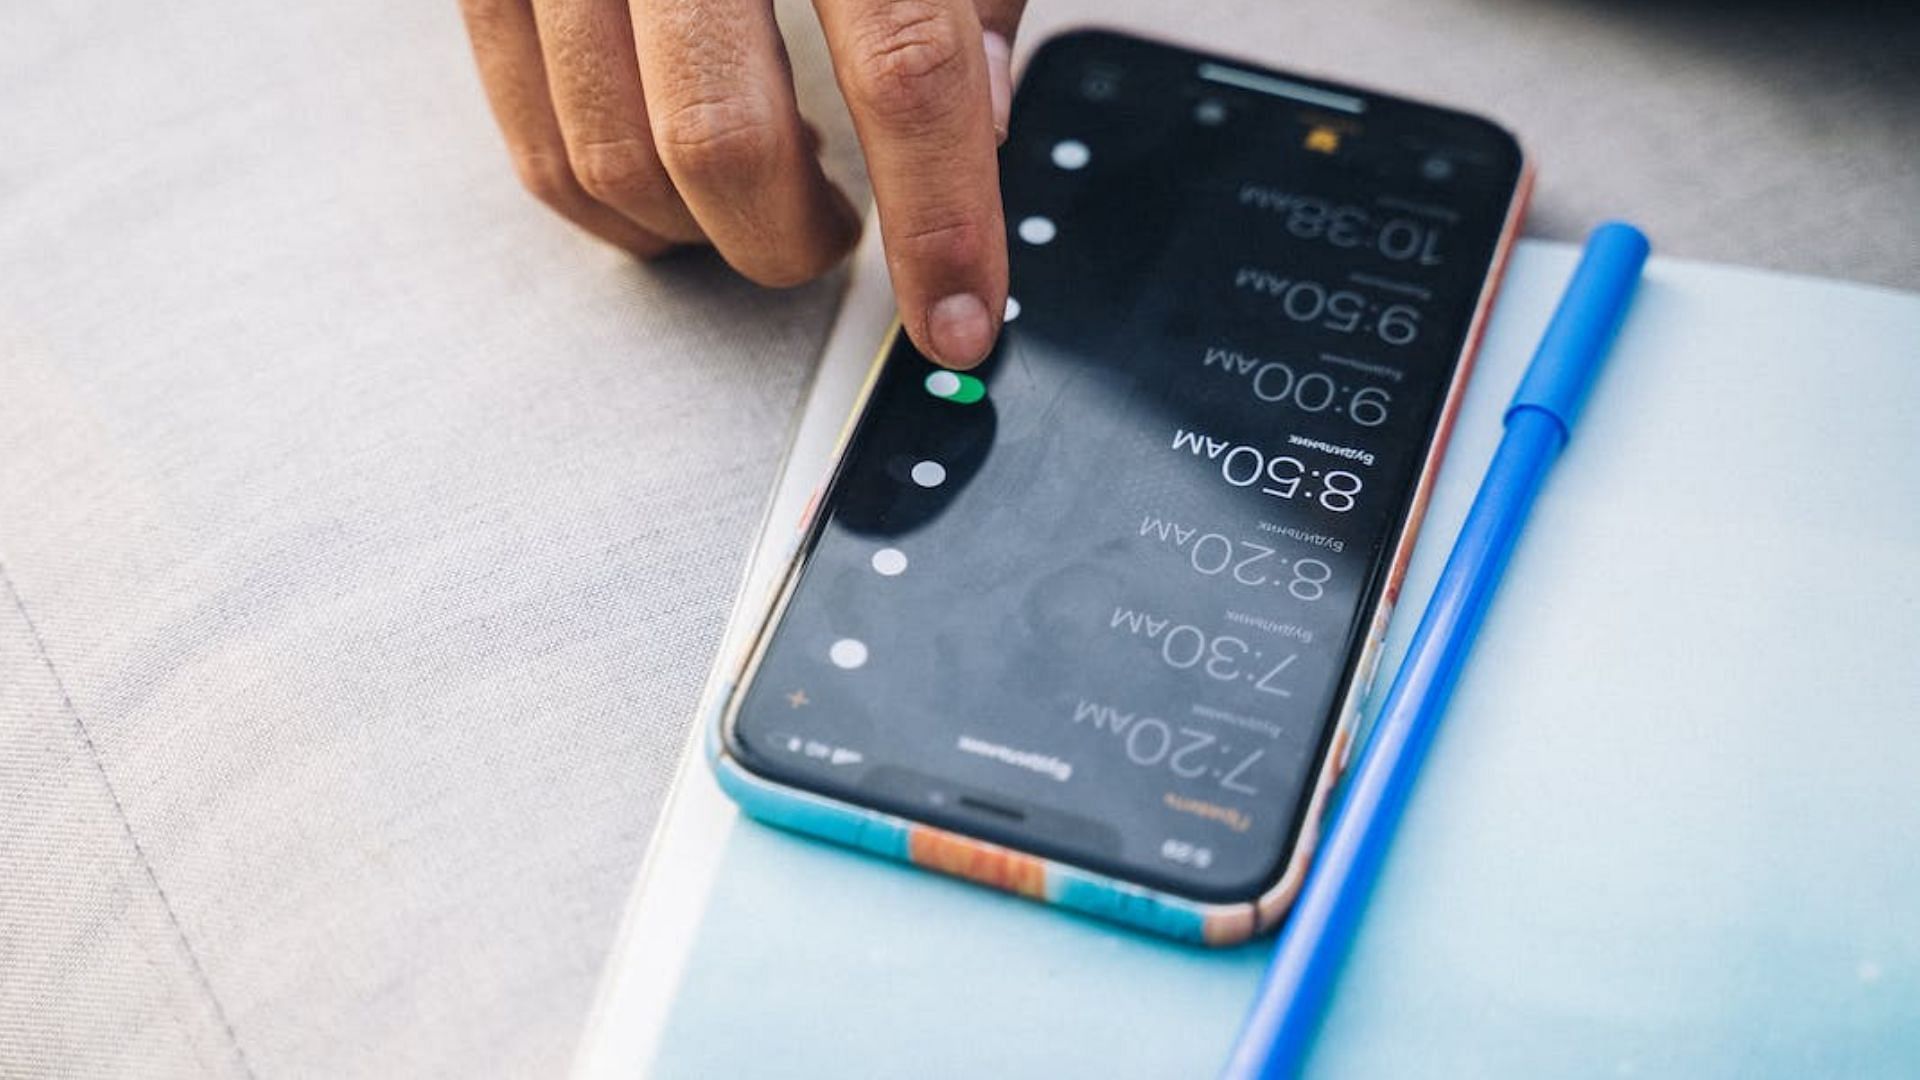 How to set an Alarm on your Android phone?(Image via Pexels)